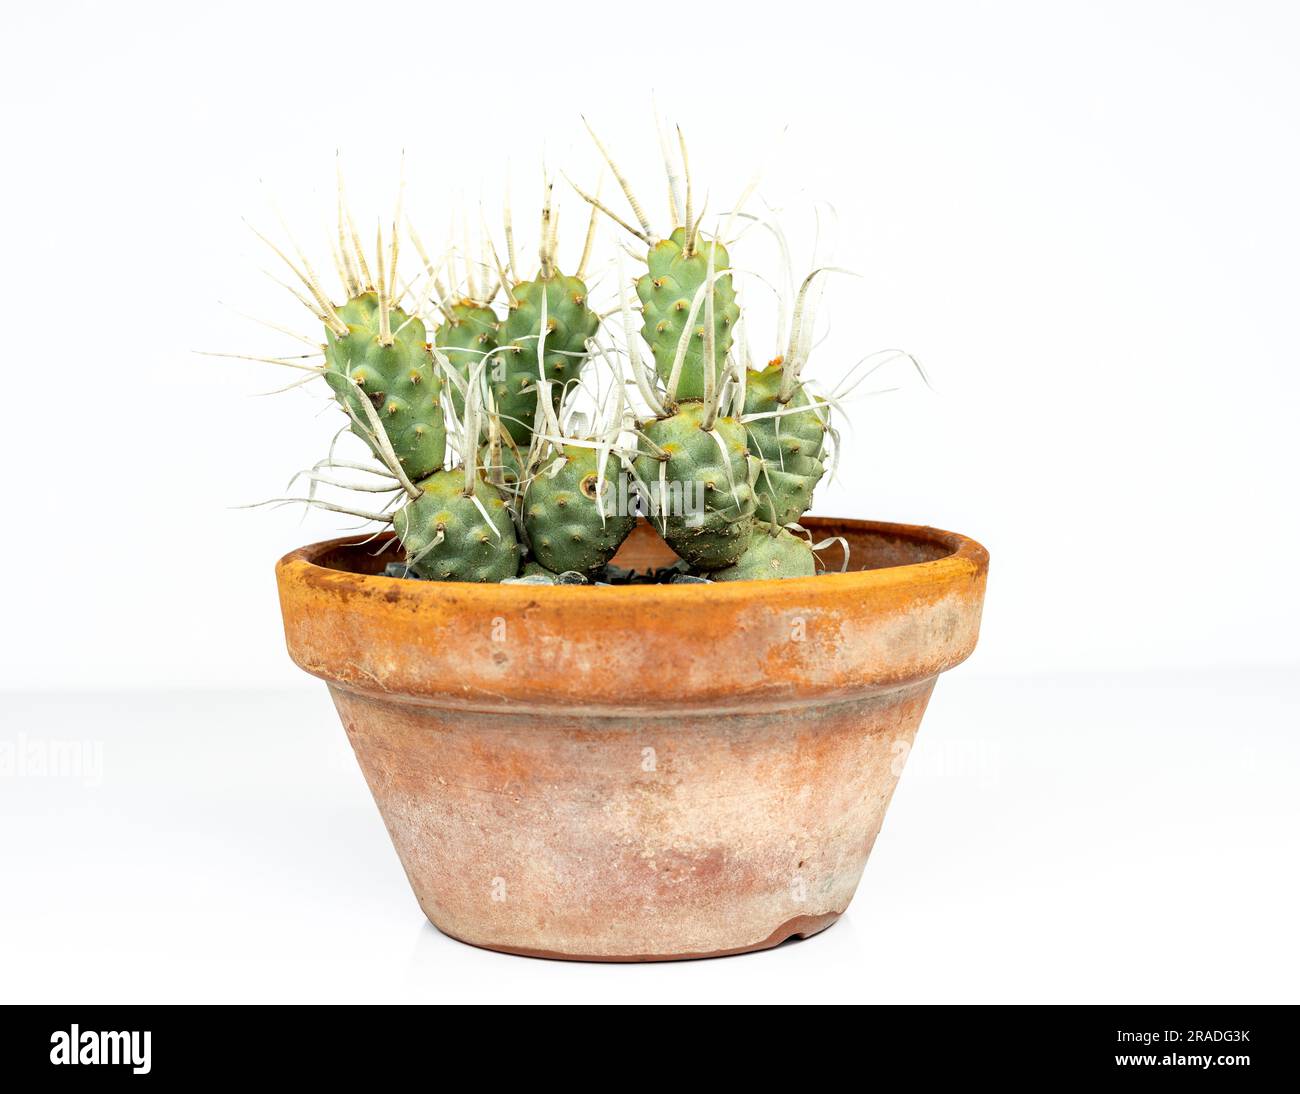 Tephrocactus articulatus cactus in a clay pot isolated on white background Stock Photo